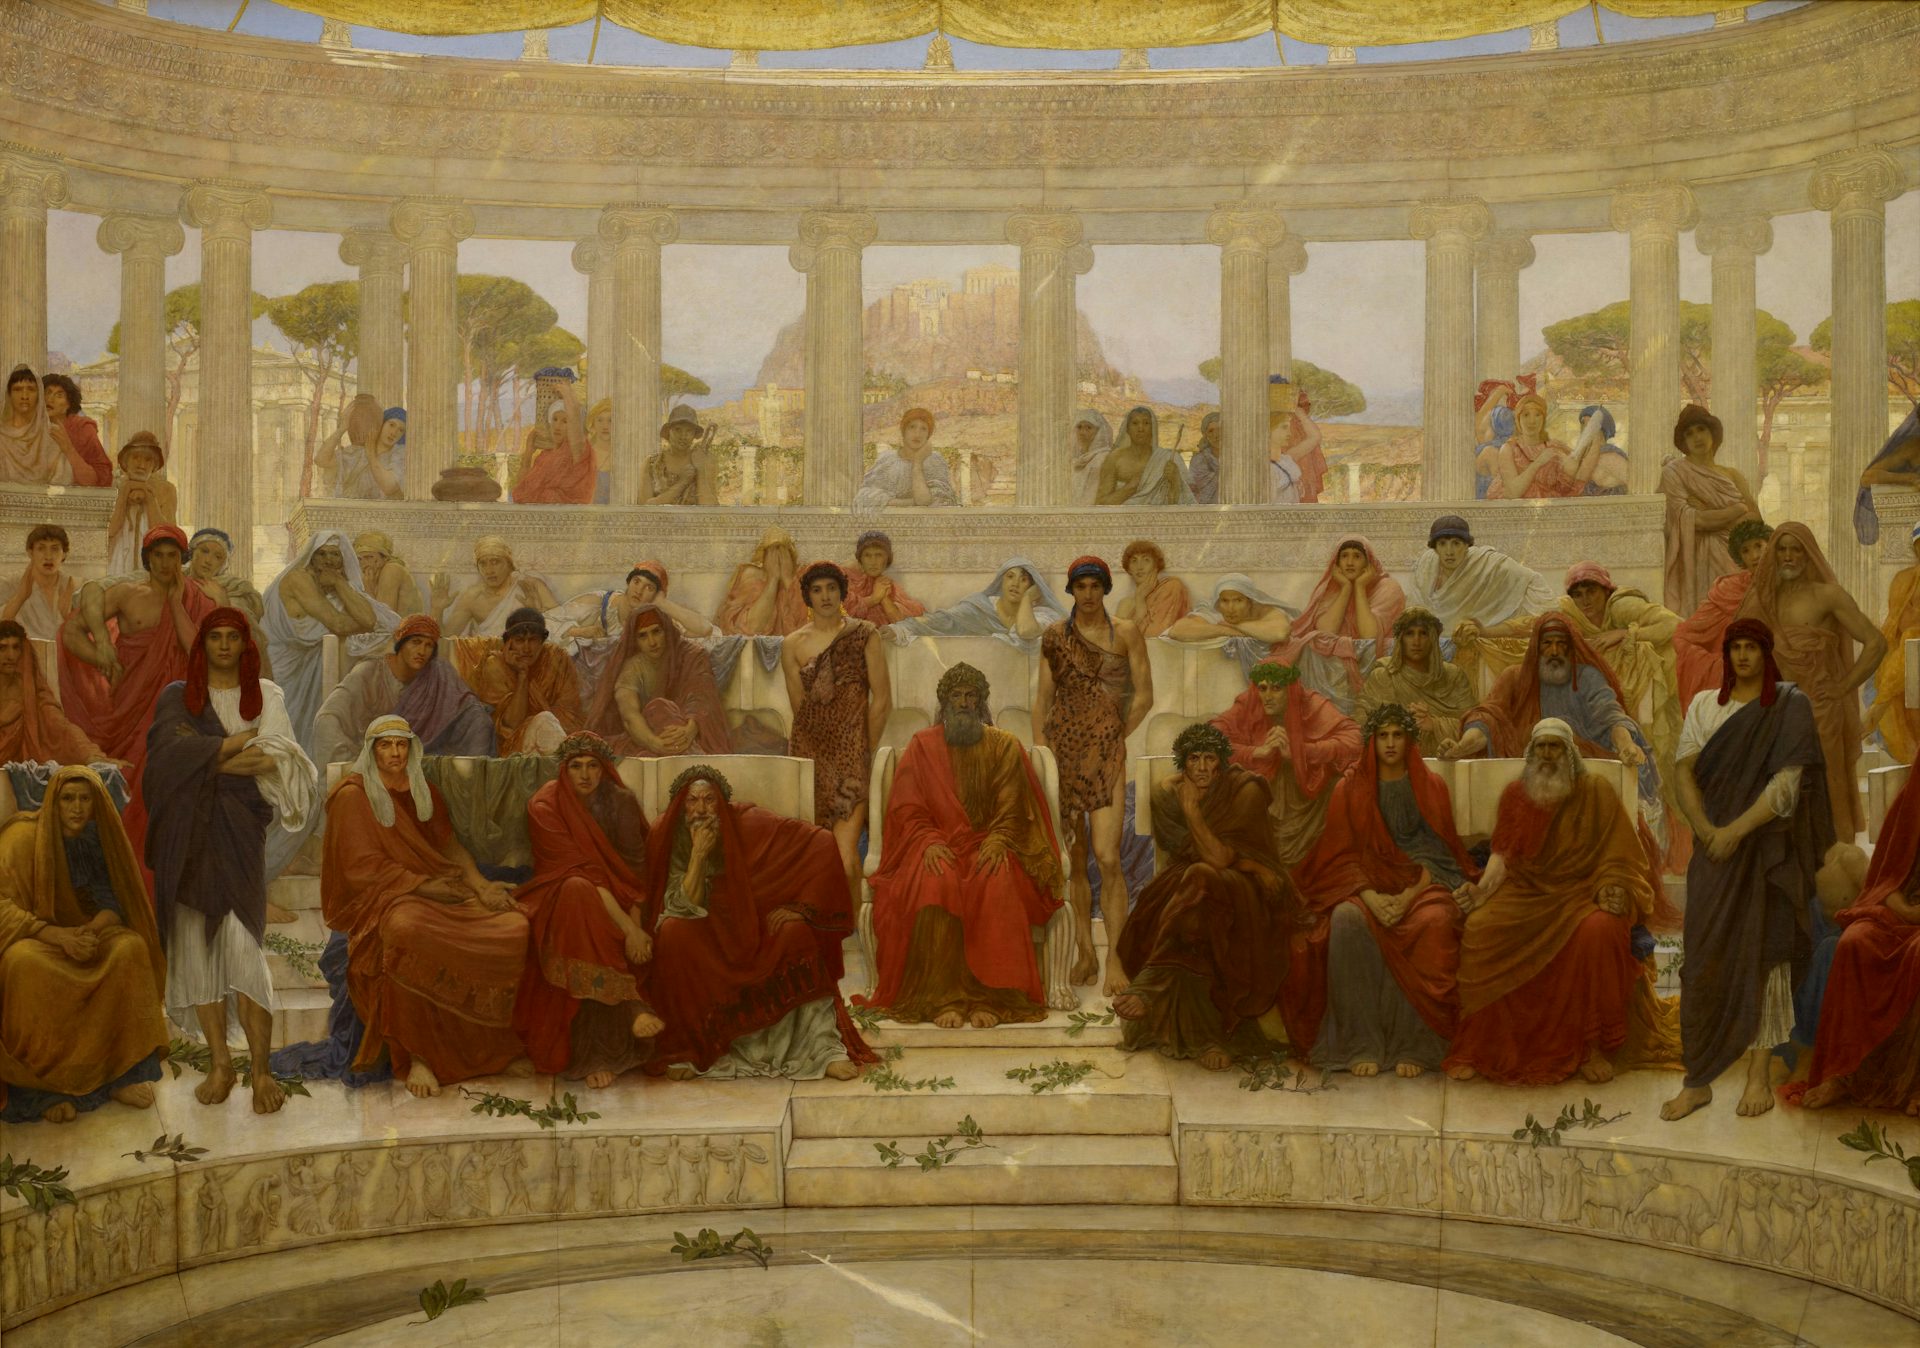 An Audience in Athens During Agamemnon by Aeschylus by William Blake Richmond